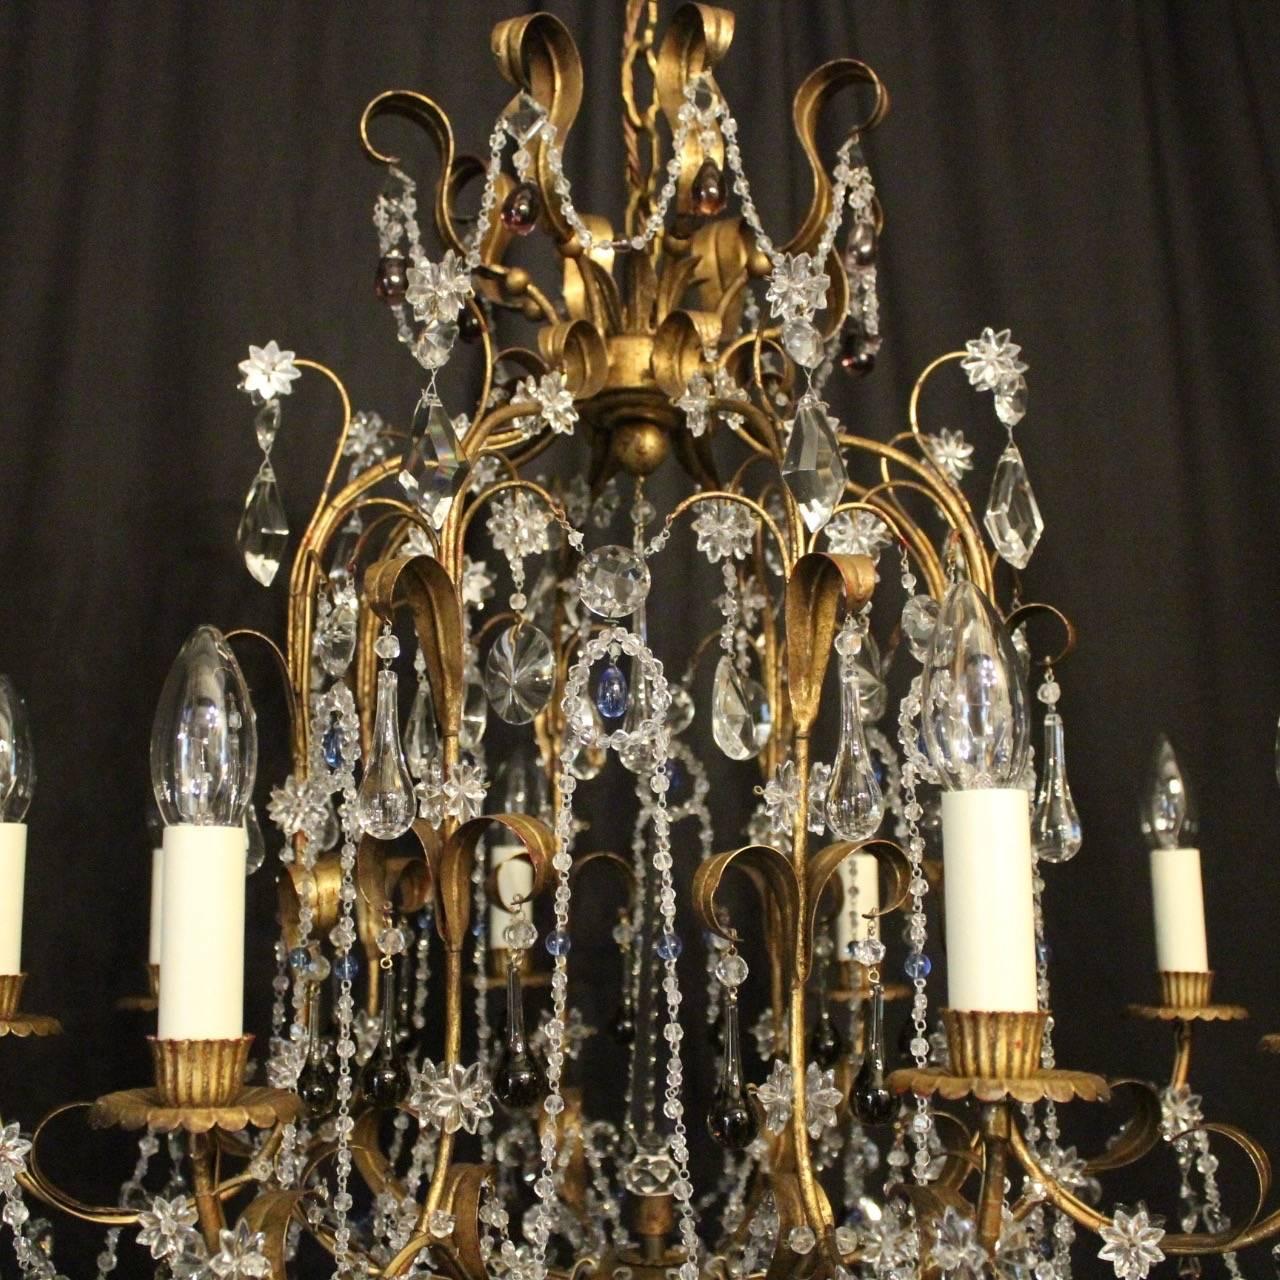 A decorative Italian gilt and crystal eight-Light birdcage form antique chandelier, the leaf scrolling arms with circular leaf bobeche drip pans and reeded candle sconces, issuing from an cage form interior with large prismatic spike and ornate